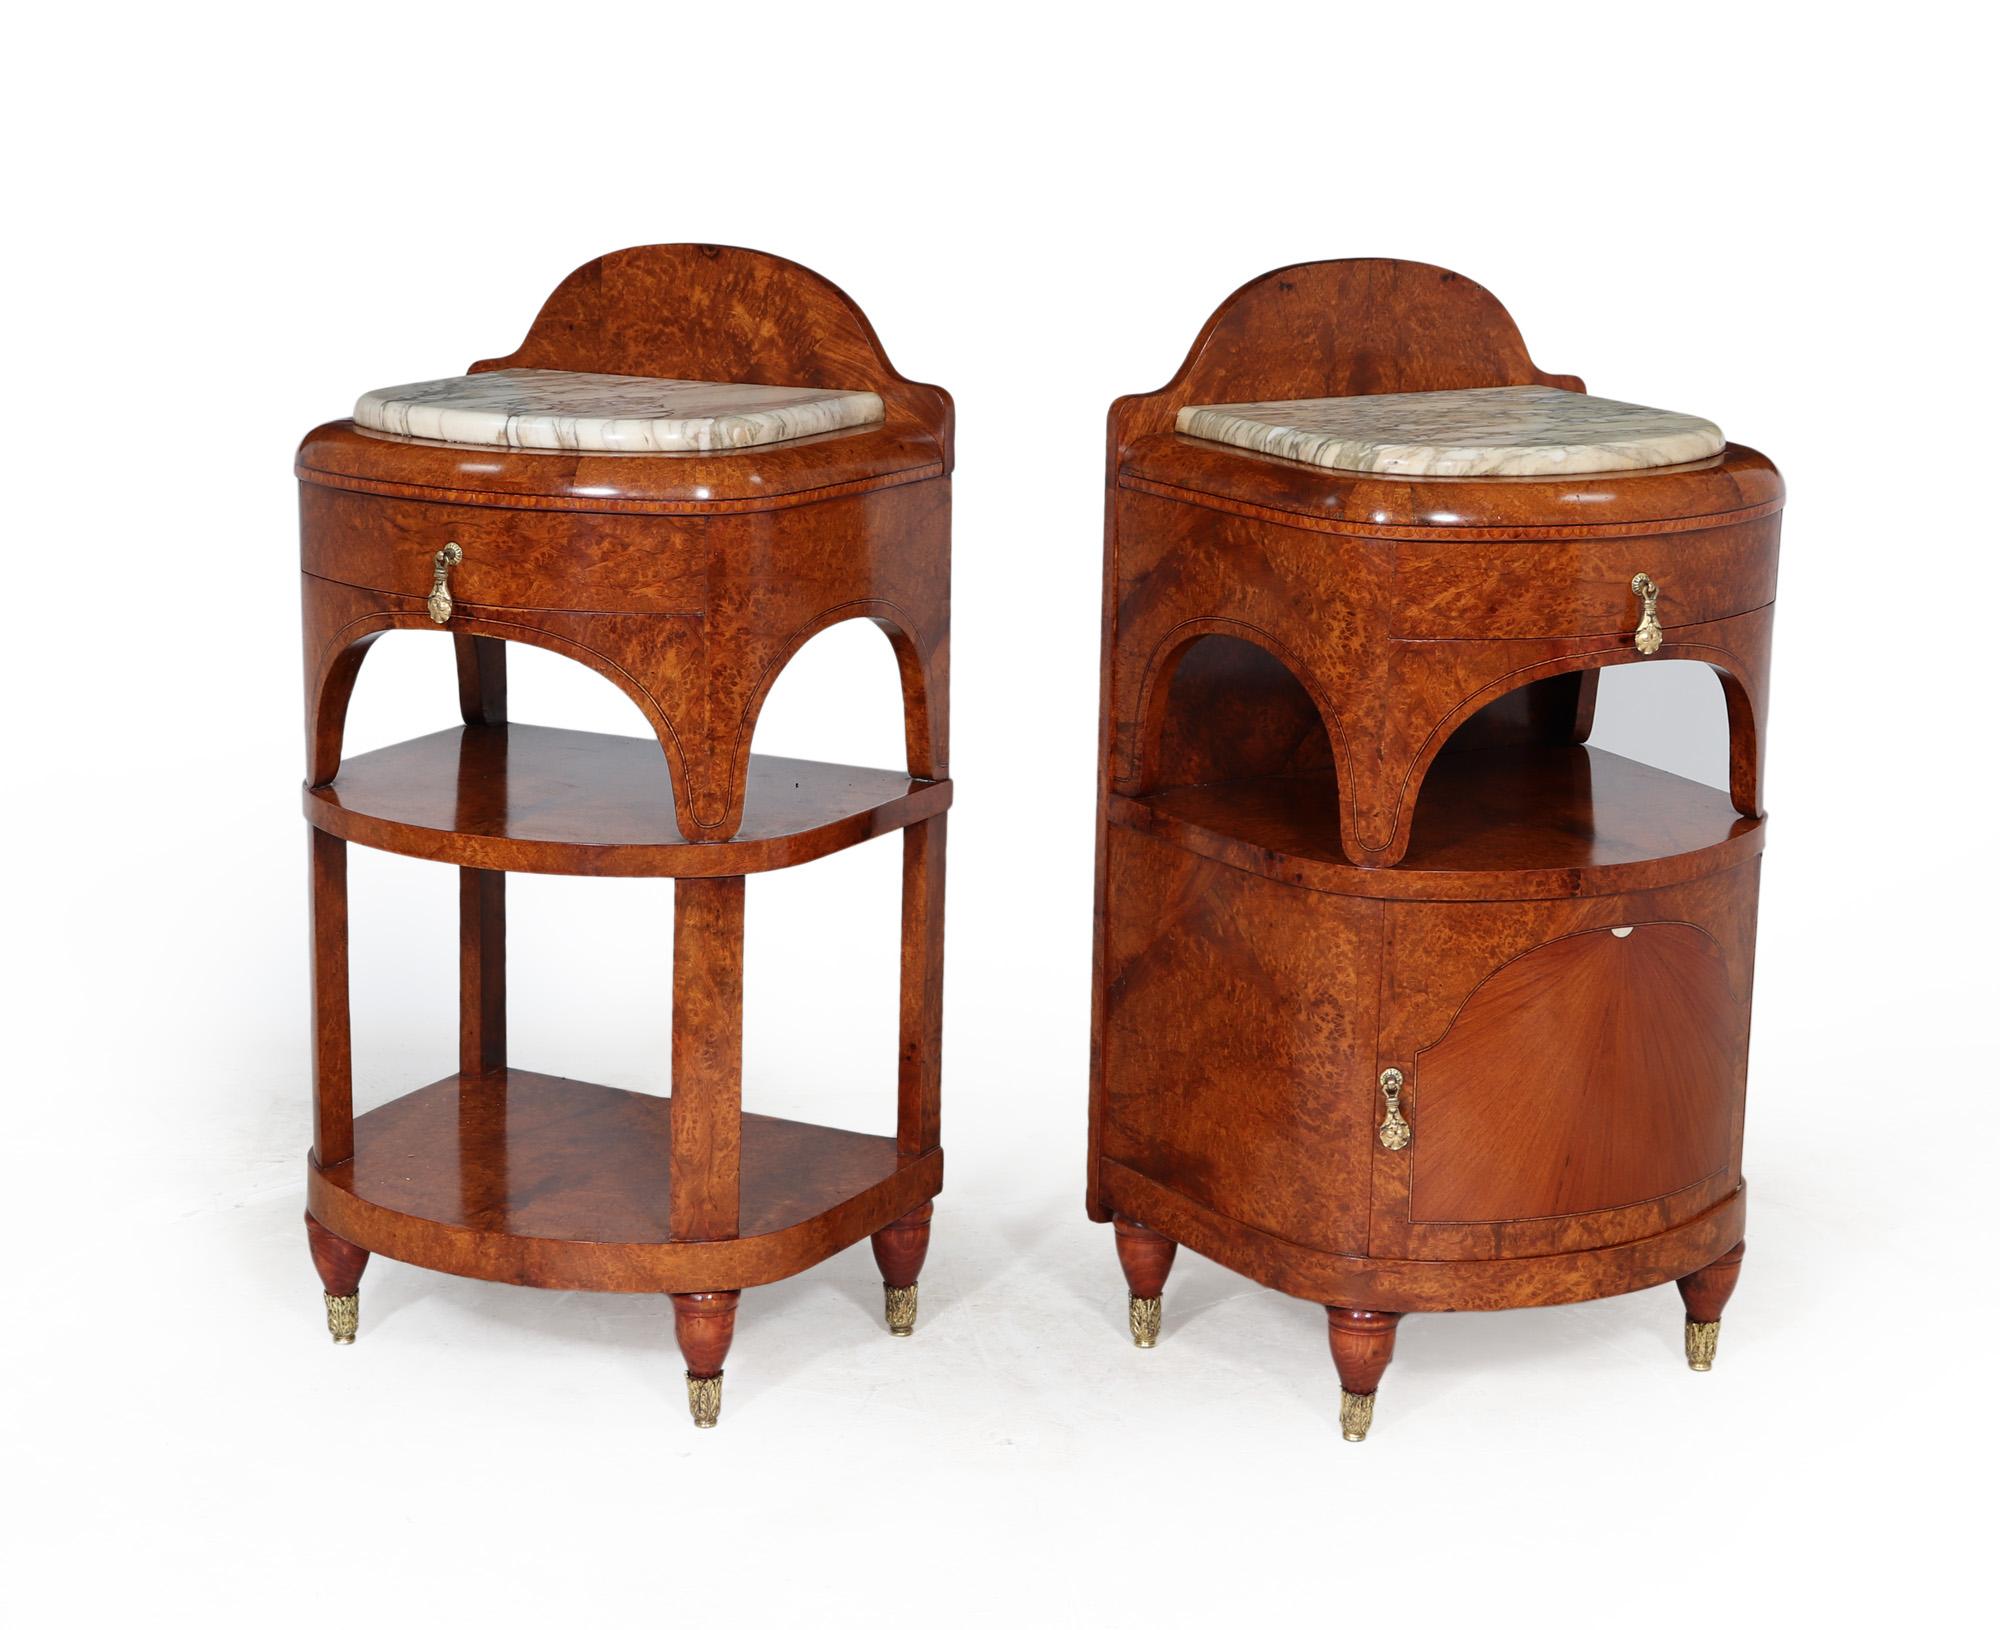 A pair of French Art Nouveau bedside cabinets of two different forms one having a cupboard shelf and drawer and the other with shelves and drawer, both are amboyna with inlaid detail and having an upstanding back with thick rounded corner white